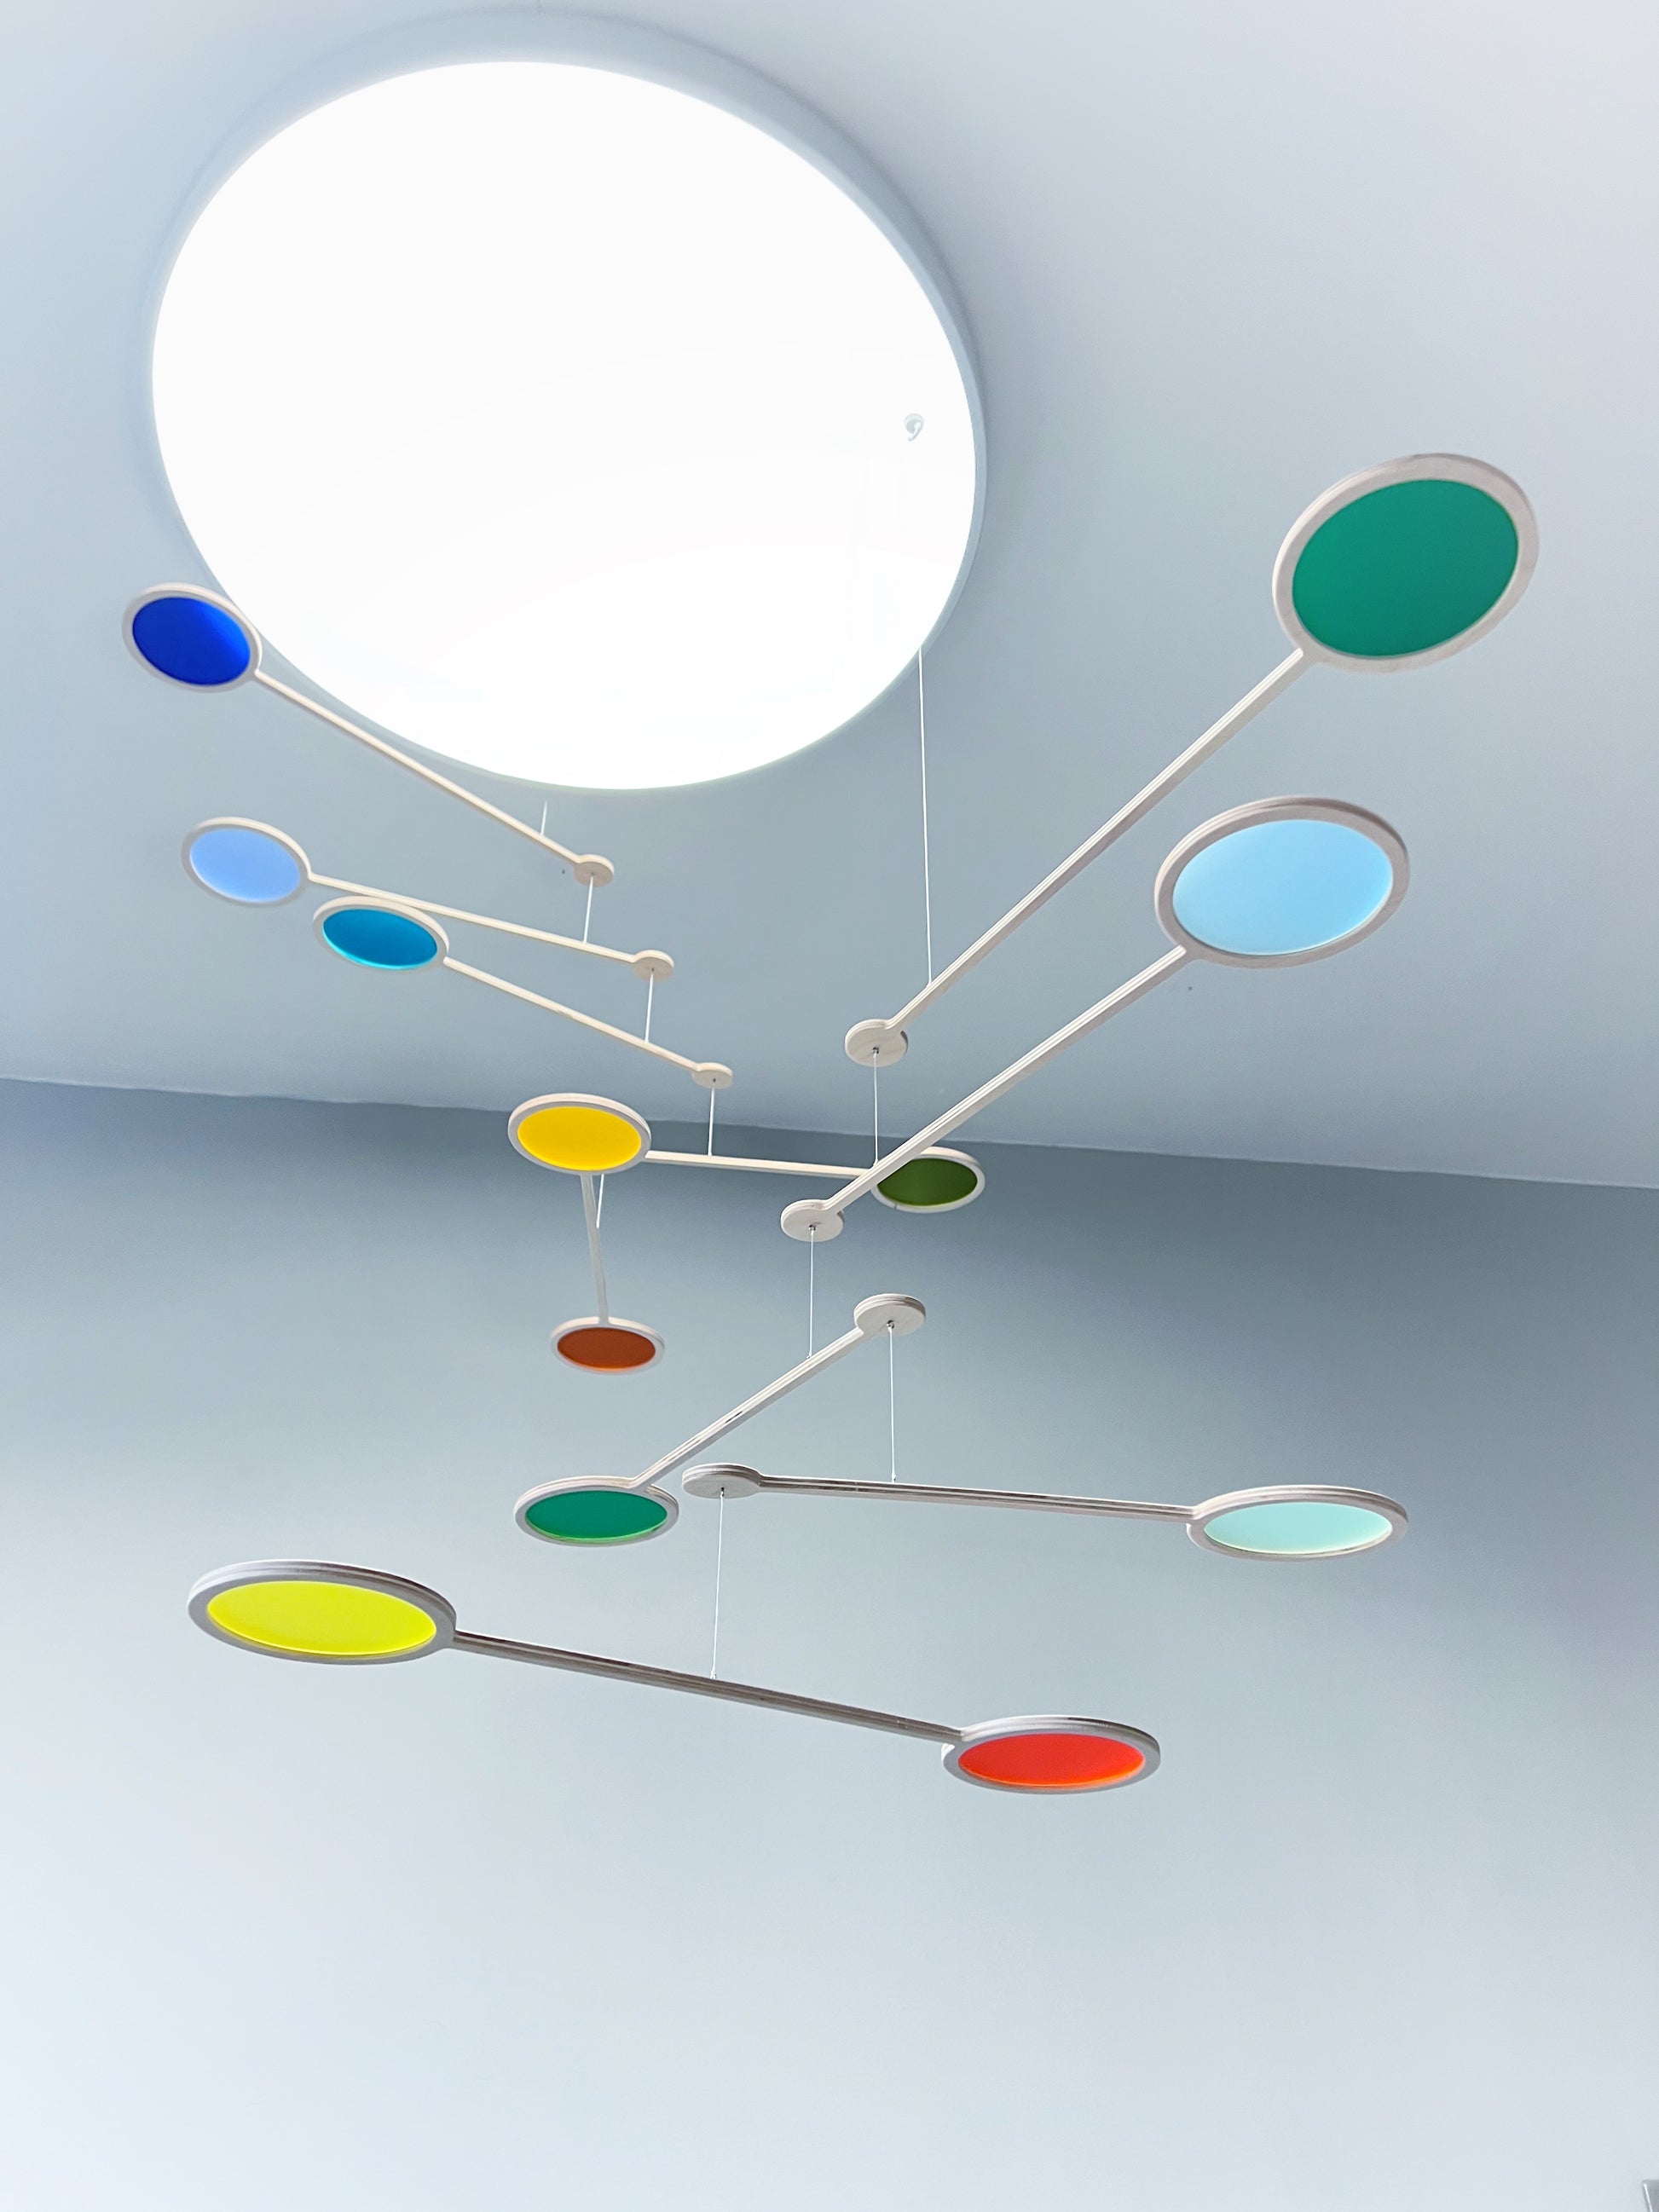 Large Kinetic Custom Mobile Sculpture. Mid Century Modern Calder Bespoke Hanging Art. Adult & Baby Nursery Mobile, Colourful Orbit - Choose your own colours mobile 

Wooden and colourful acrylic mobile. Influenced by Calder mobiles and the mid-century modern movement. A beautiful piece of moving hanging art.

Double form orbit mobile at tiered height, hanging from 2 strings, creating one kinetic form. 

Both Orbit mobiles together hang approximately 80cm from the ceiling at their lowest point. Singular Orbi